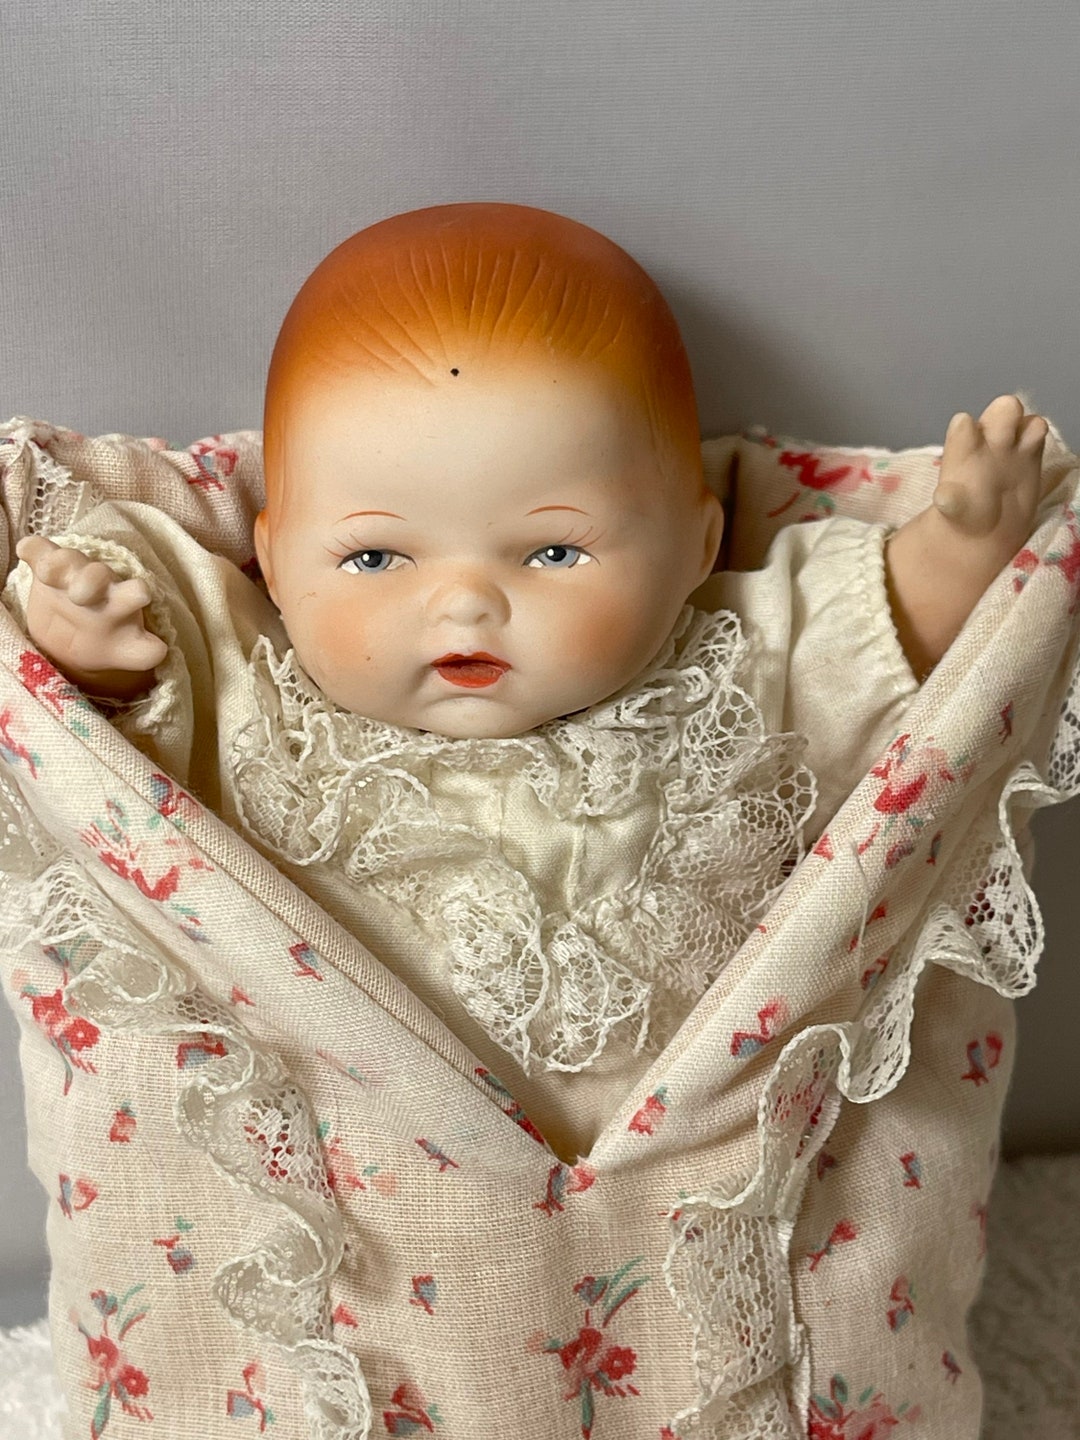 Vintage Porcelain Baby Doll 65 Tall Etsy